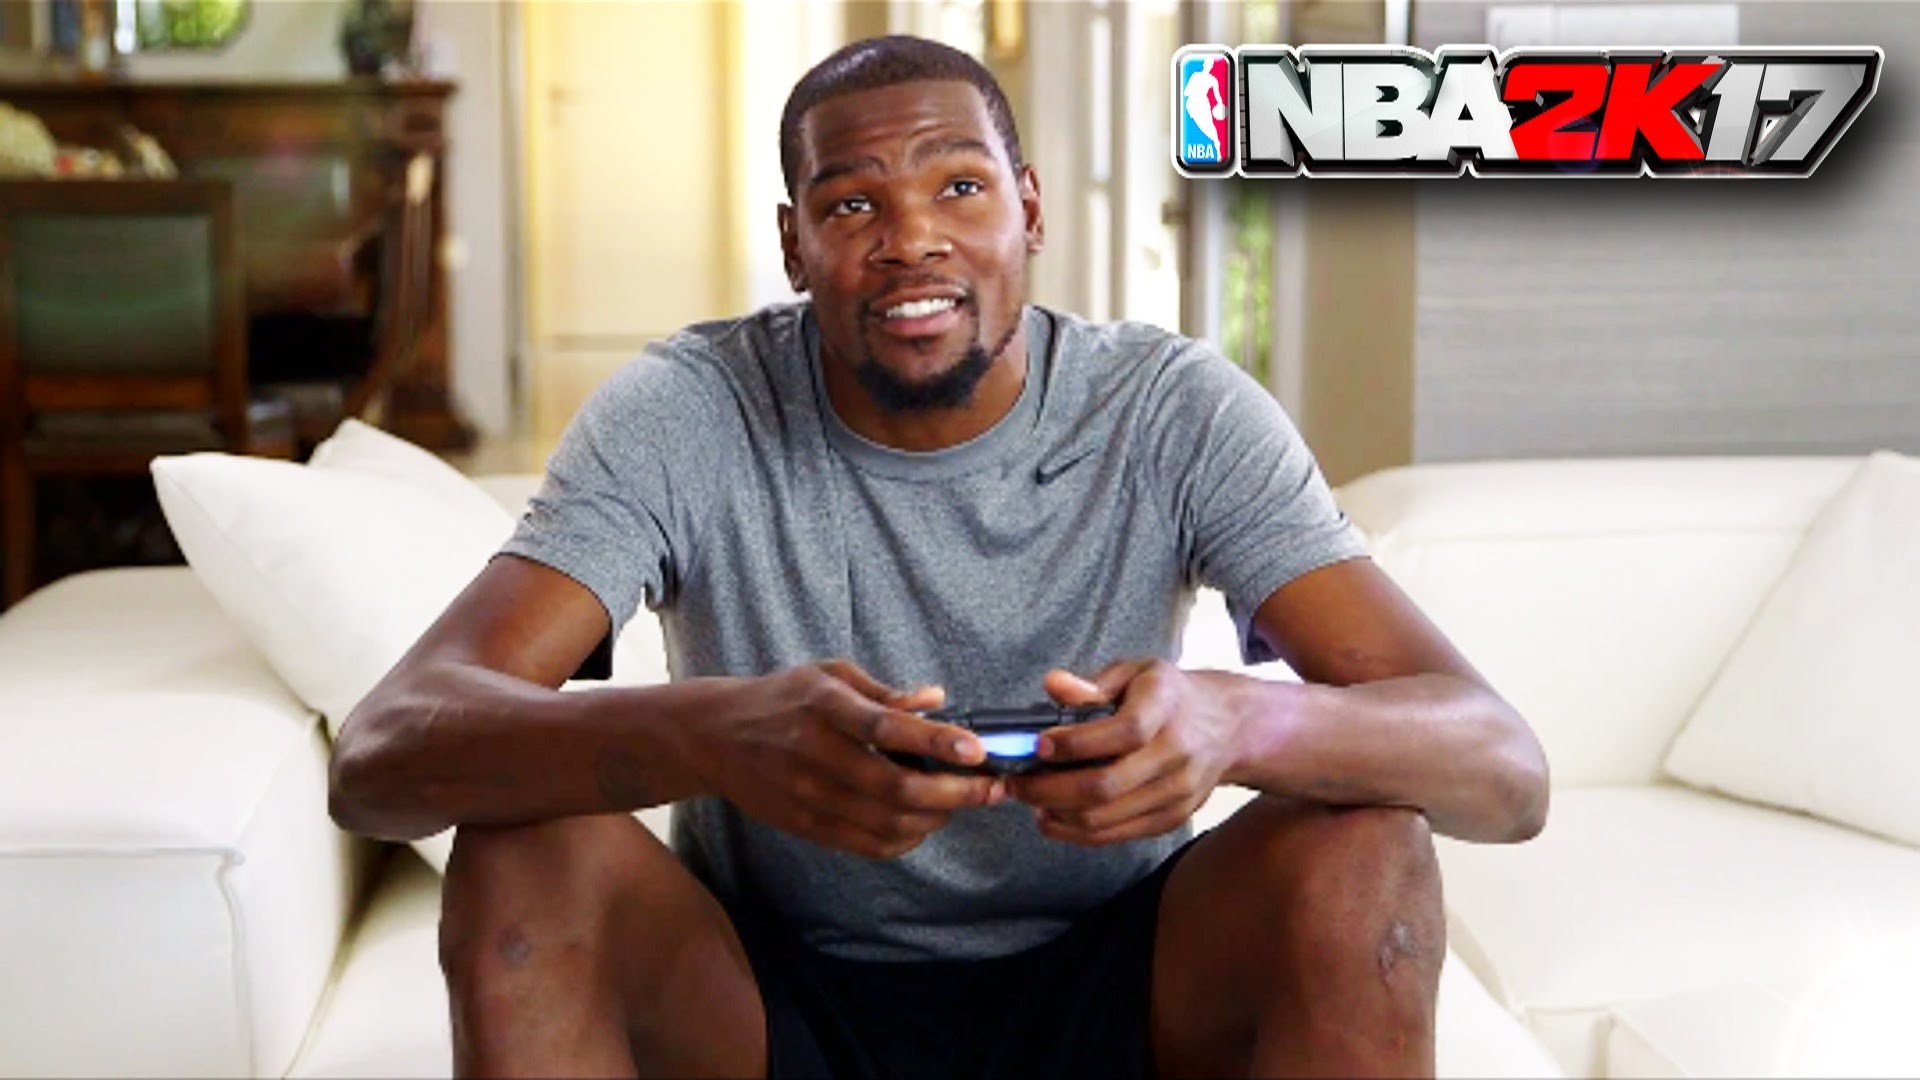 1920x1080 KEVIN DURANT PLAYS NBA 2K17 AGAINST RUSSELL WESTBROOK PARODY DURANT VS  WESTBROOK MYPARK GAMEPLAY - YouTube